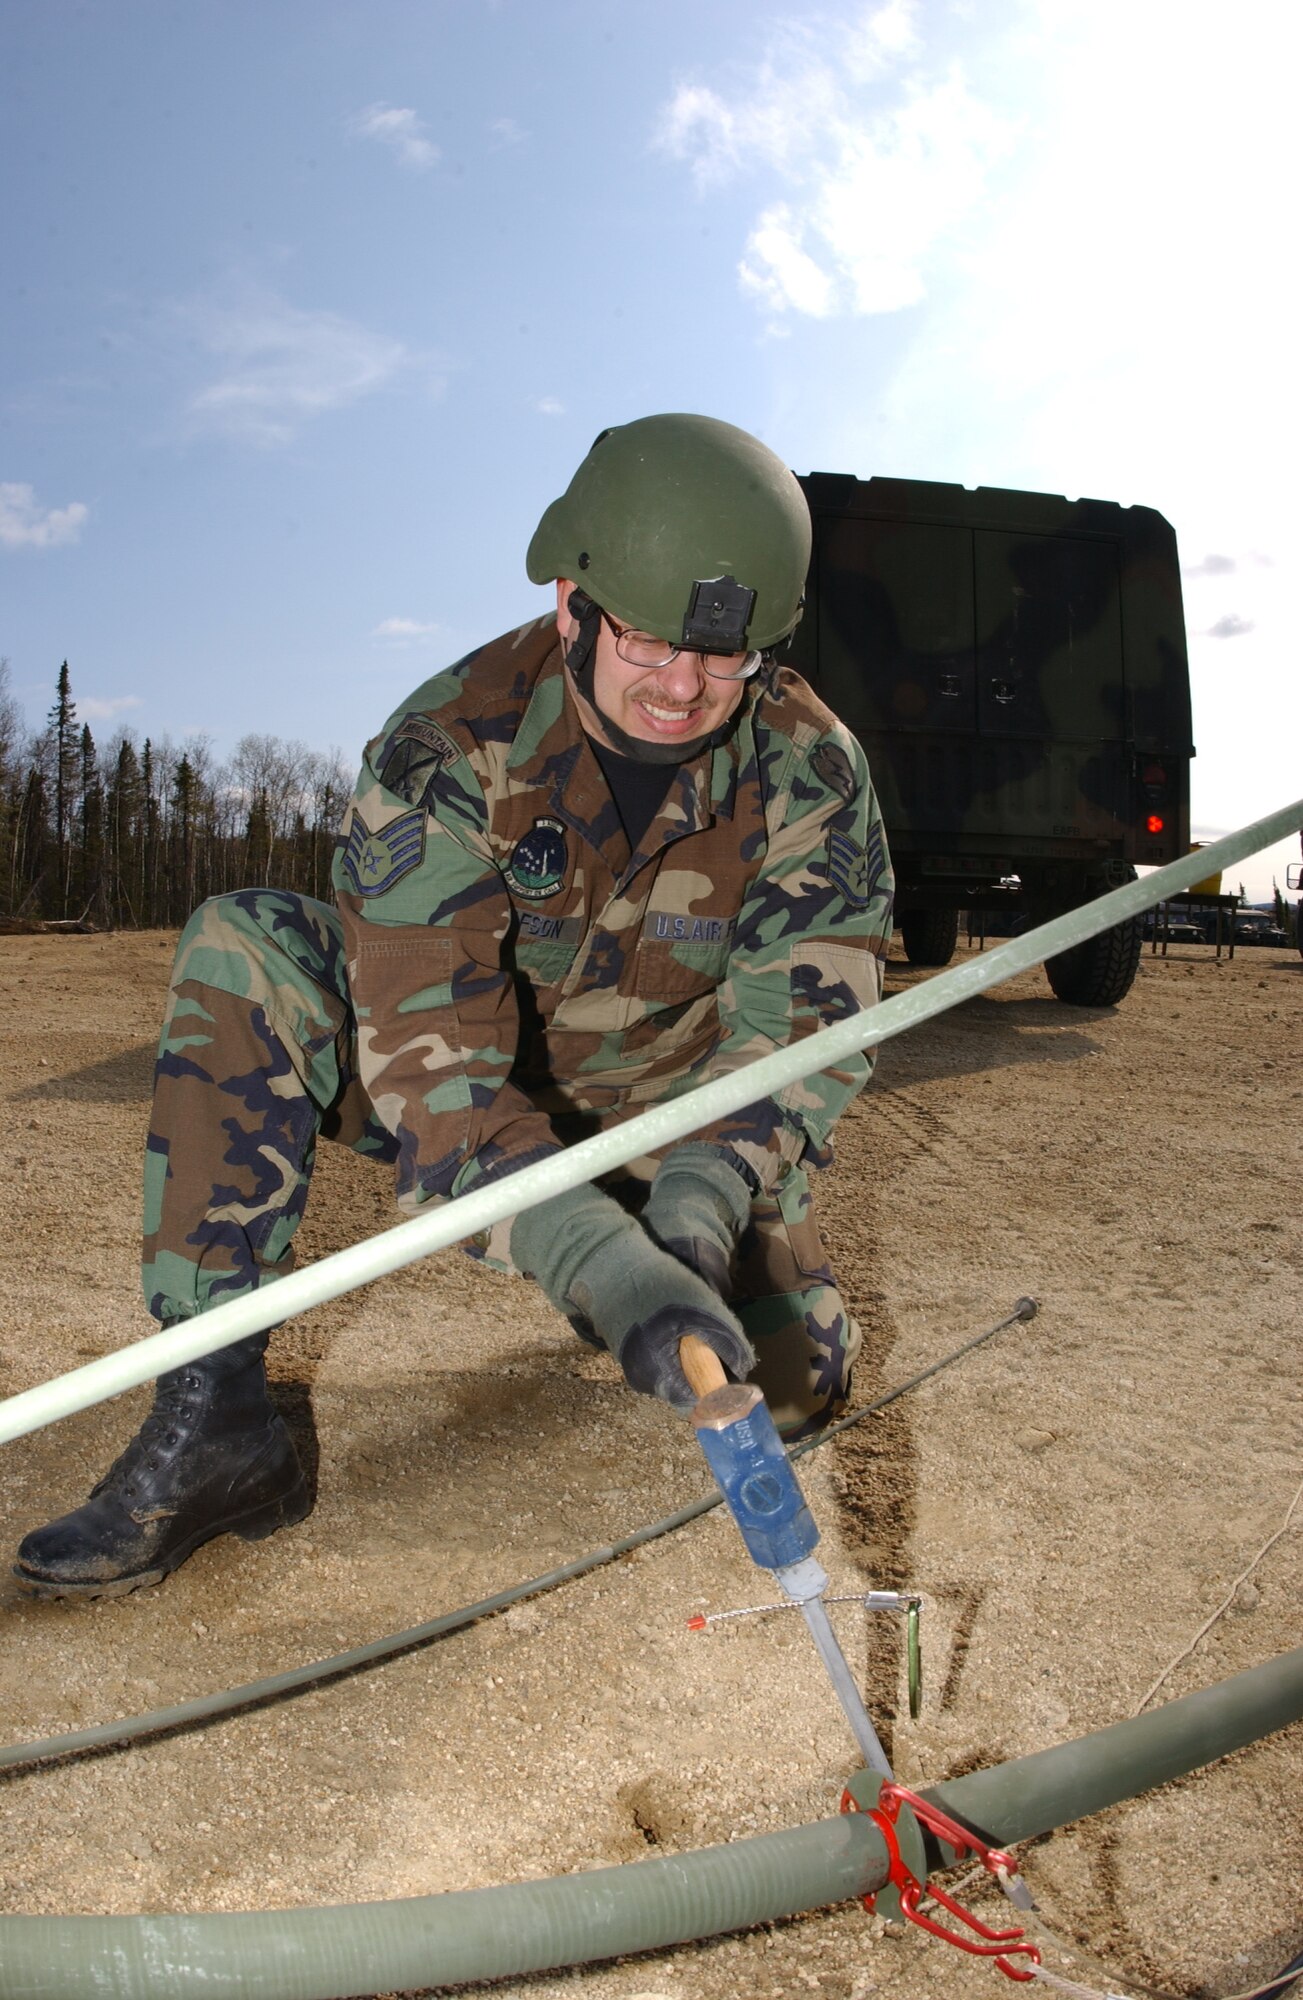 EIELSON AIR FORCE BASE, Alaska -- Staff Sgt. Richard Gustafson, 3rd Air Support Operations Squadron, pounds a stake into the ground in order to erect an OE-254 FM Radio Antenna enabling communication with Army personnel May 15 during Operation URSA Minor. ASOS members completed day one of a three-day field training exercise designed to prepare Airman with hands on combat training and experience before deploying to a combat area. (U.S. Air Force Photo by Airman 1st Class Jonathan Snyder)